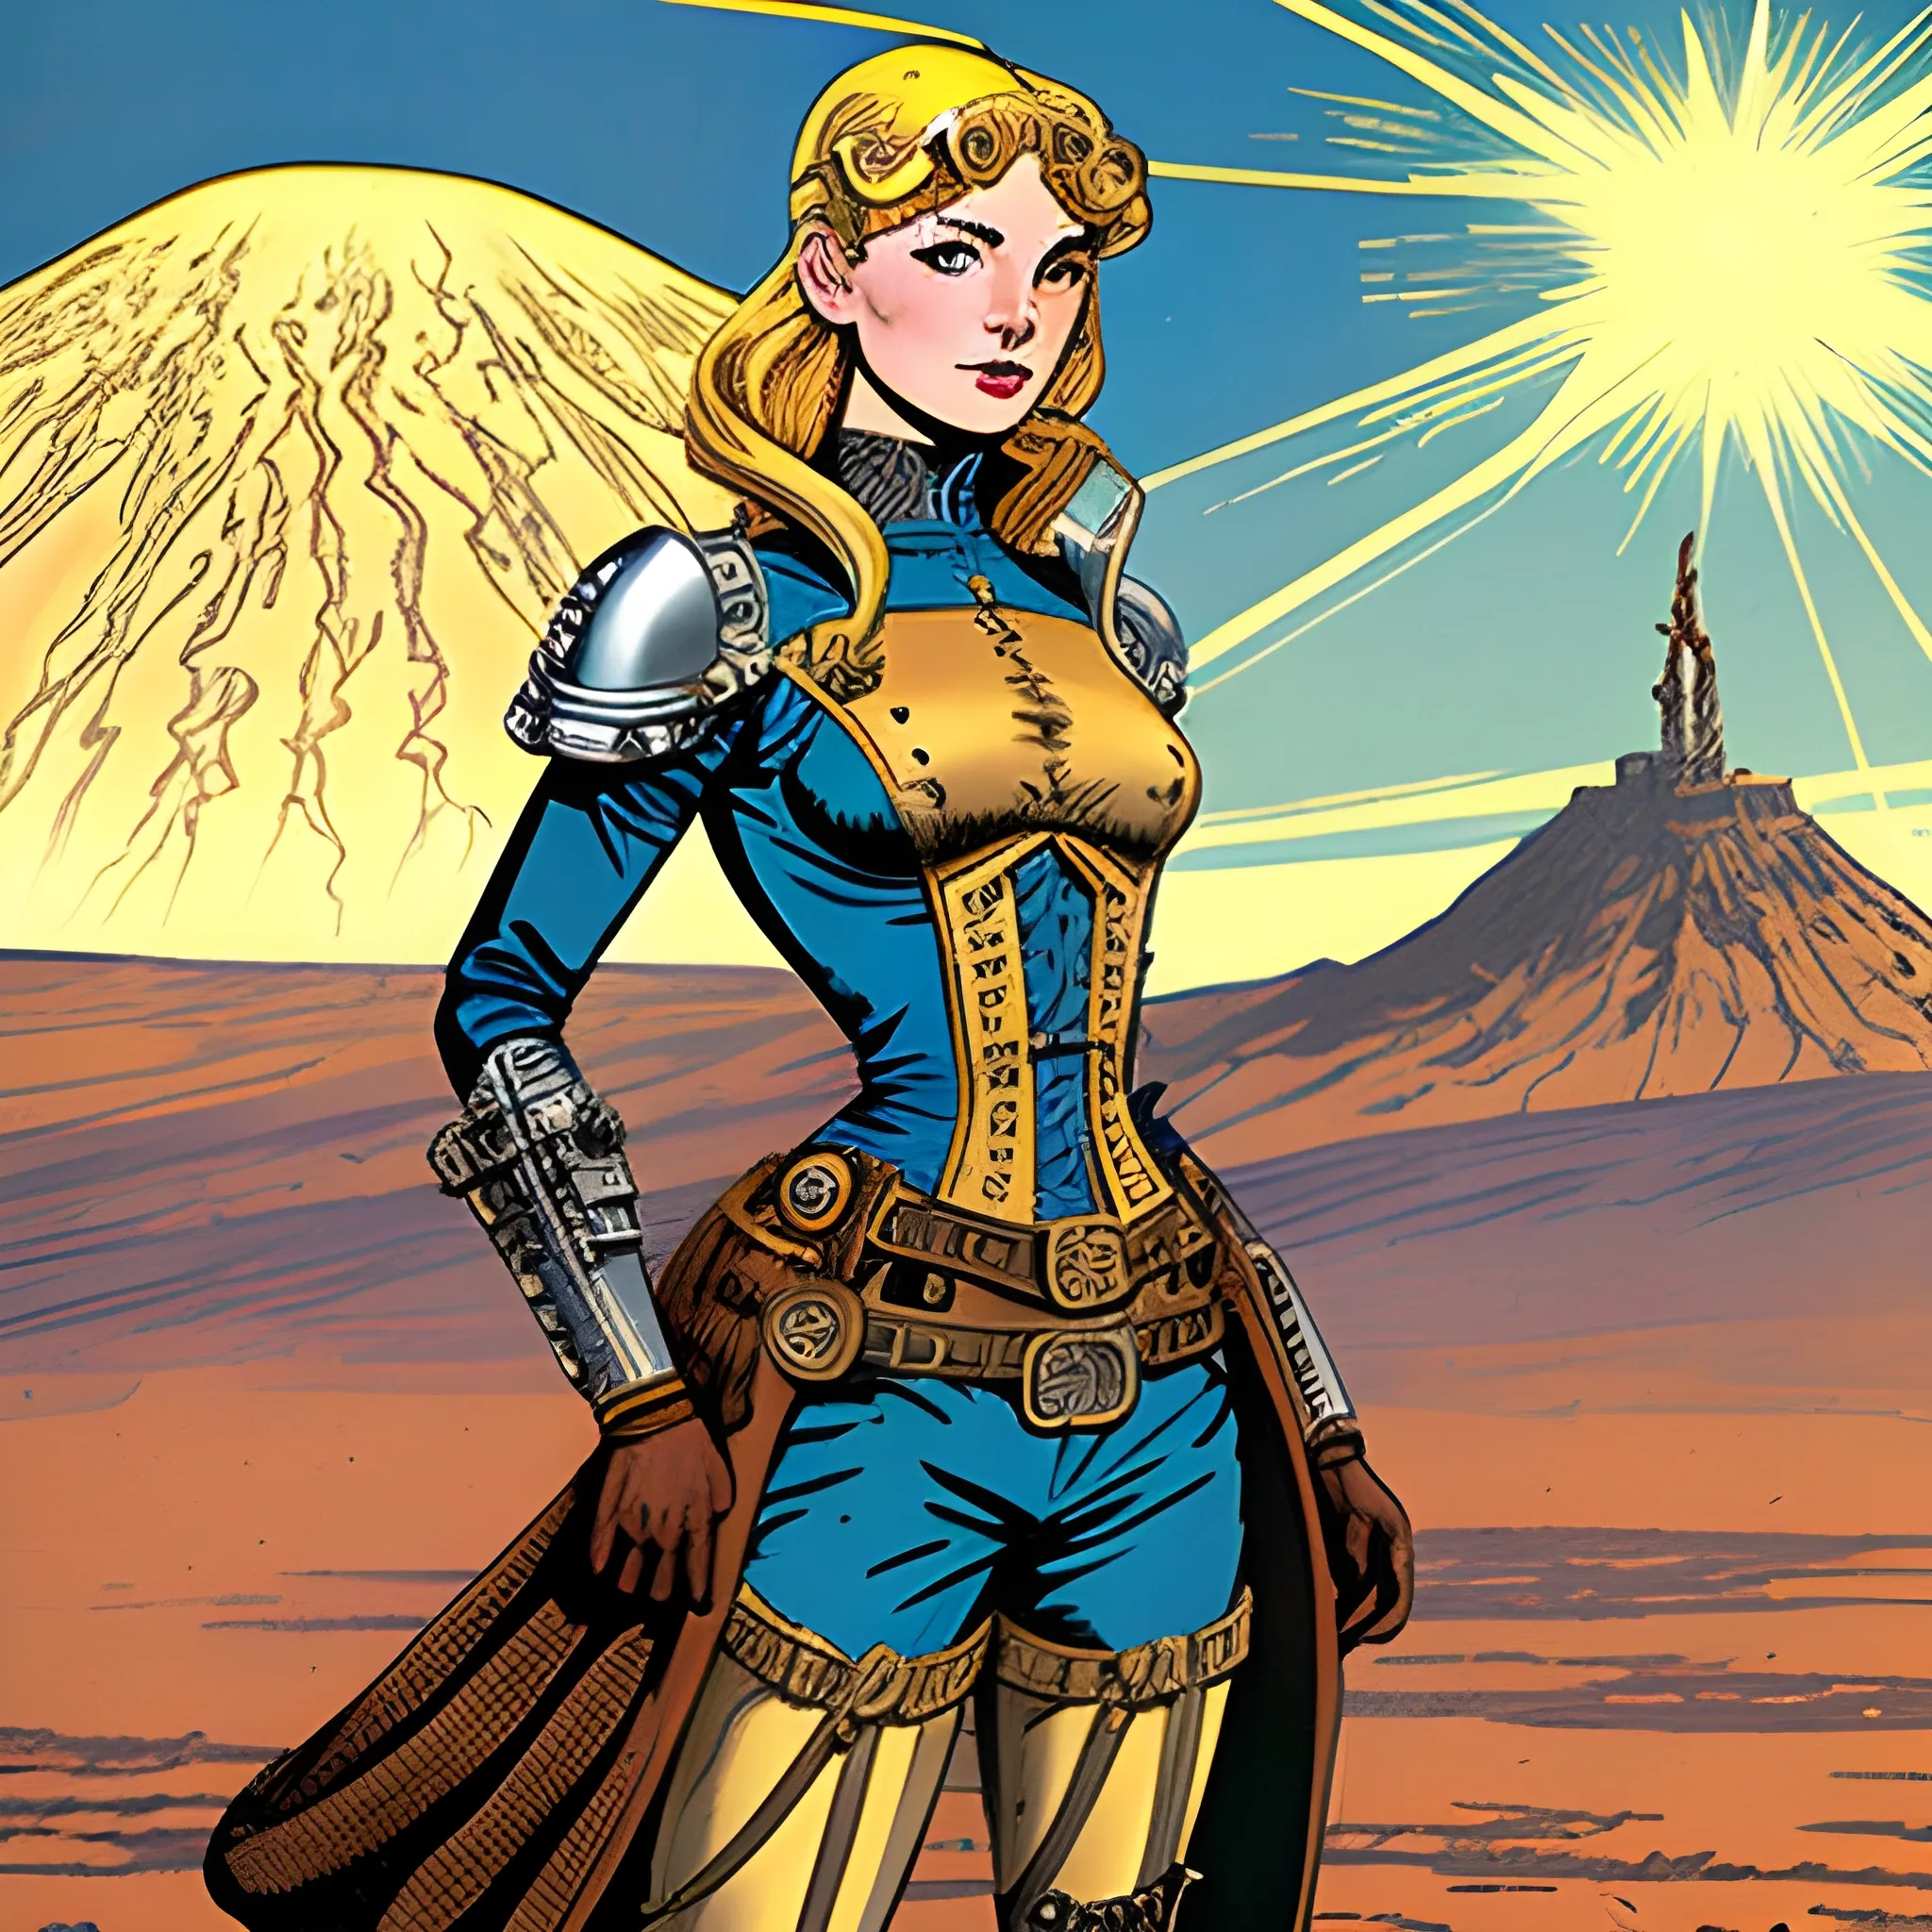 character concept art of a steampunk woman engineer | | blonde, full body, illustration by Al Williamson, tan shorts, mount ararat very far away in the background, medieval poster, intricate upper body, lightning fantasy magic,